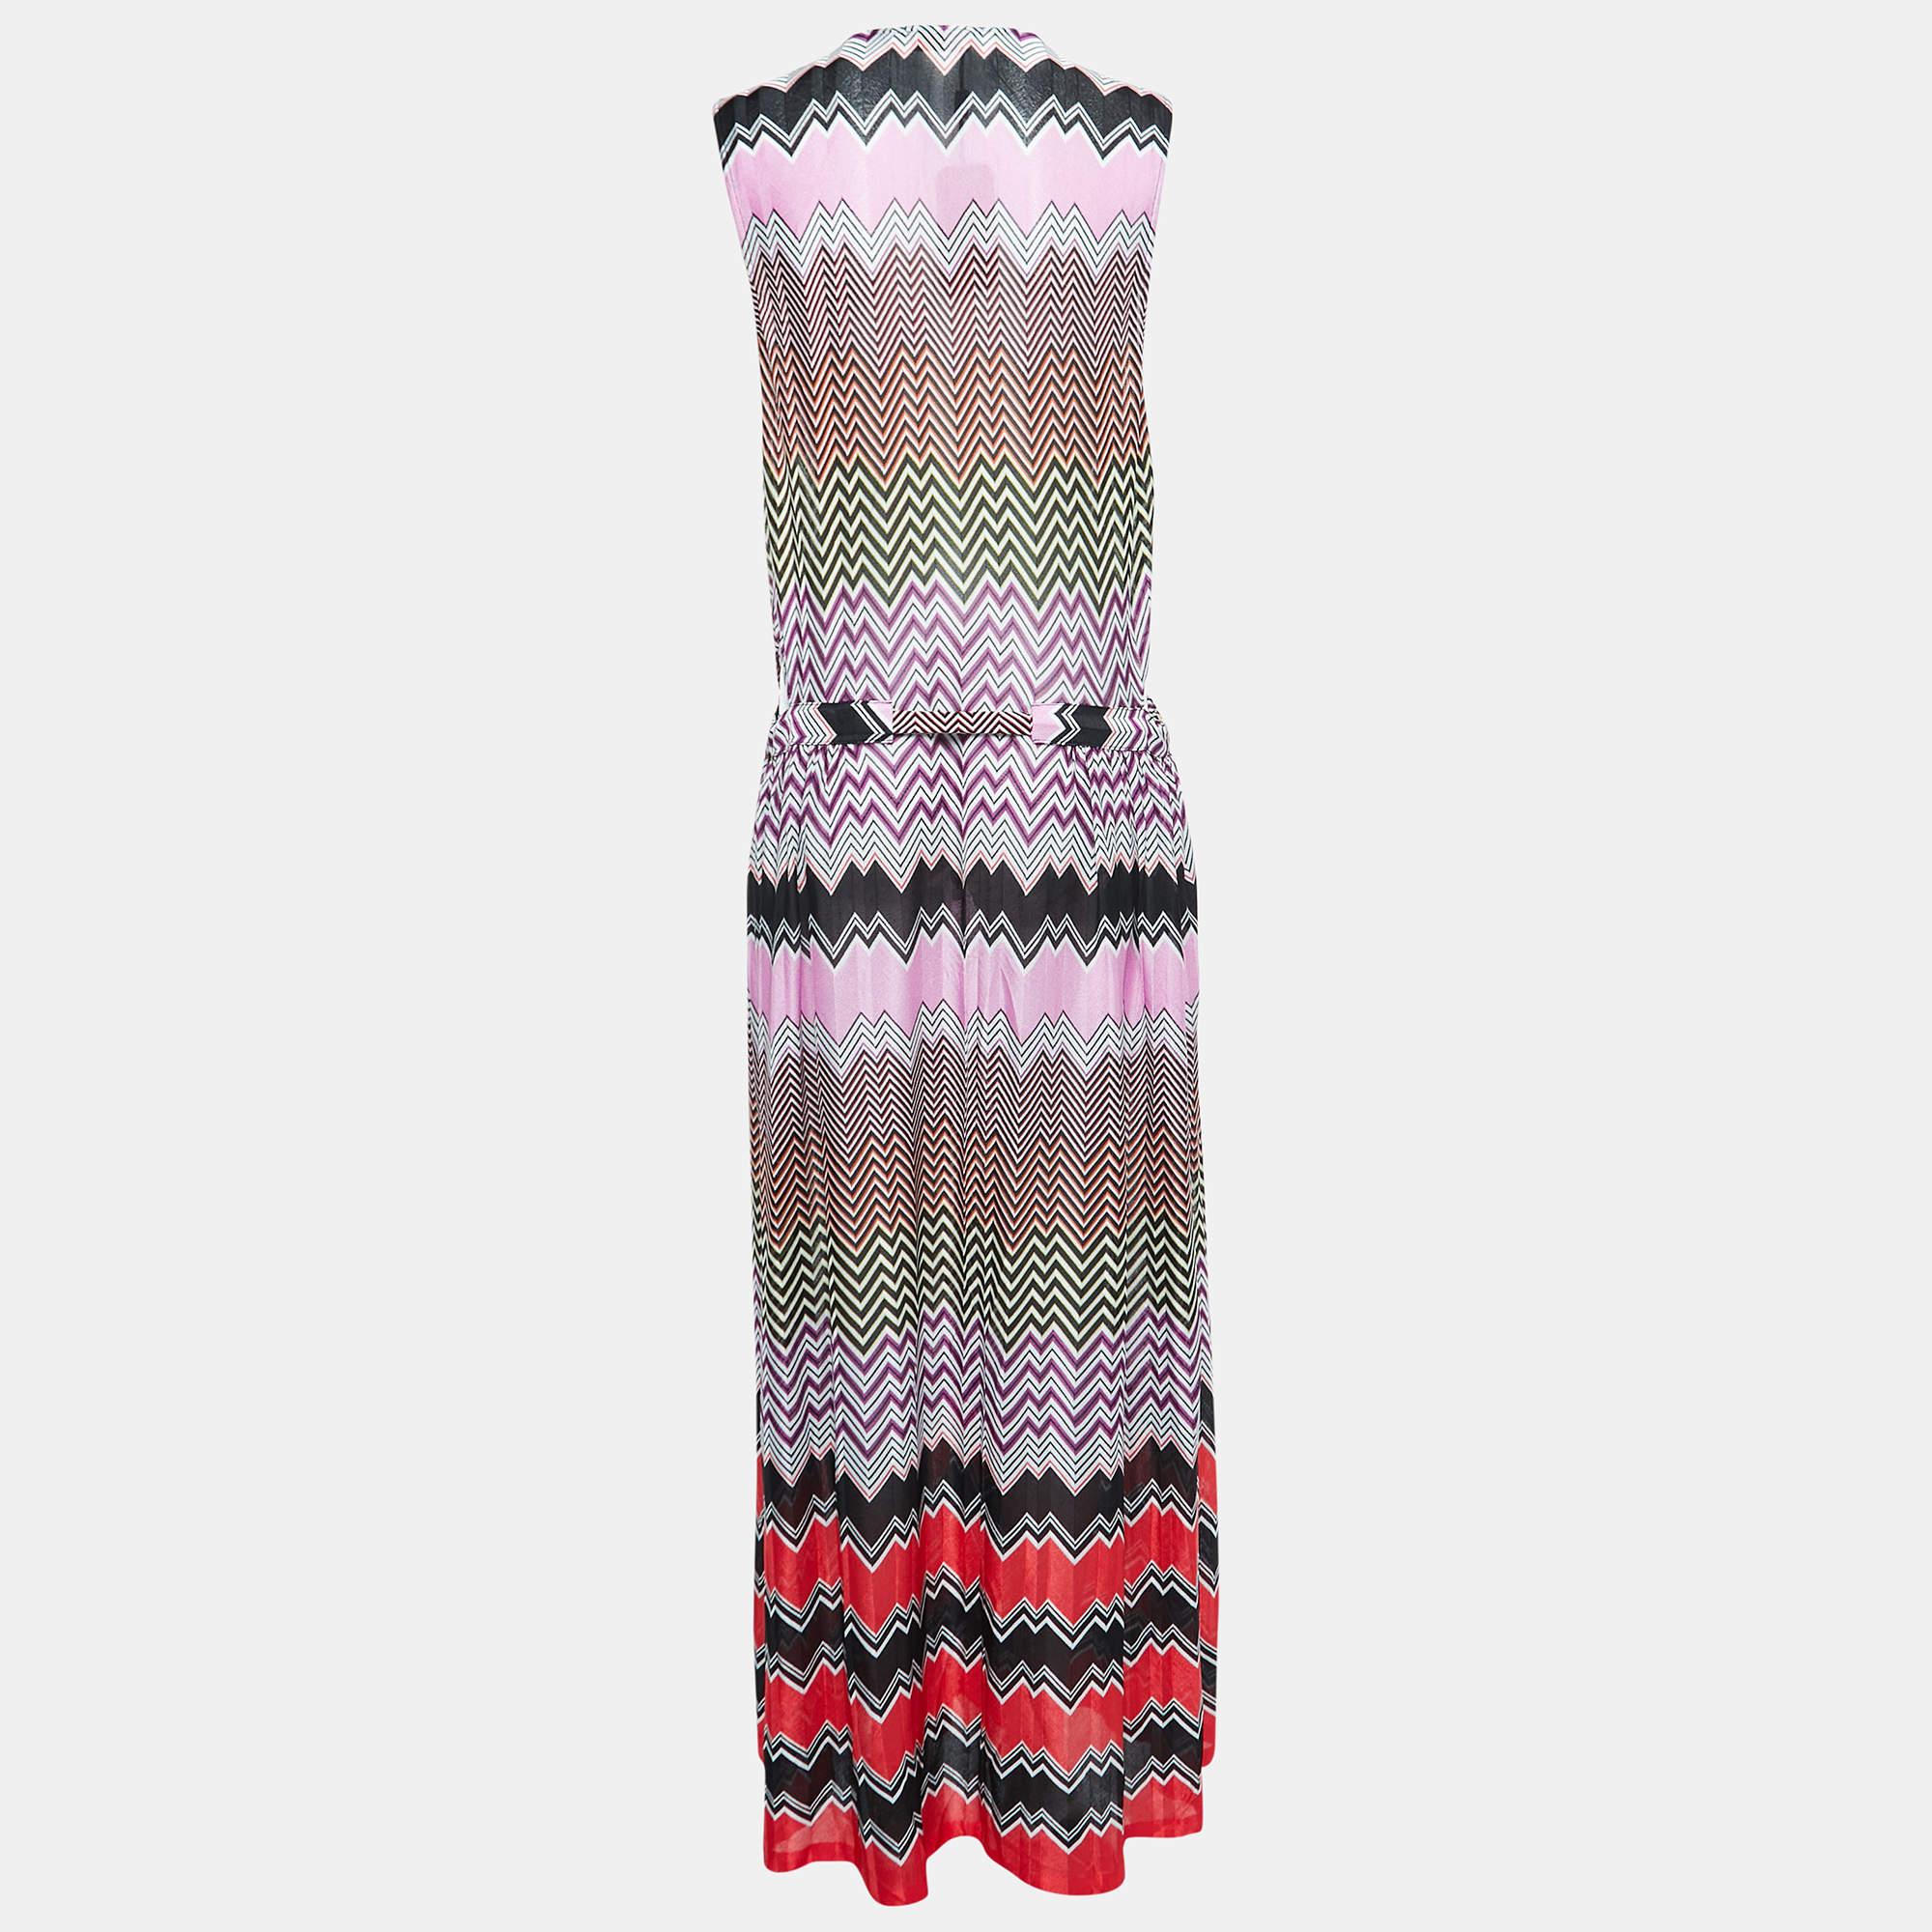 The Missoni Mare cover-up dress is a stunning, beach-ready garment. It features Missoni's signature chevron pattern in vibrant, multicolored hues. This lightweight, sleeveless dress is perfect for layering over swimwear, with a flowy fit and a